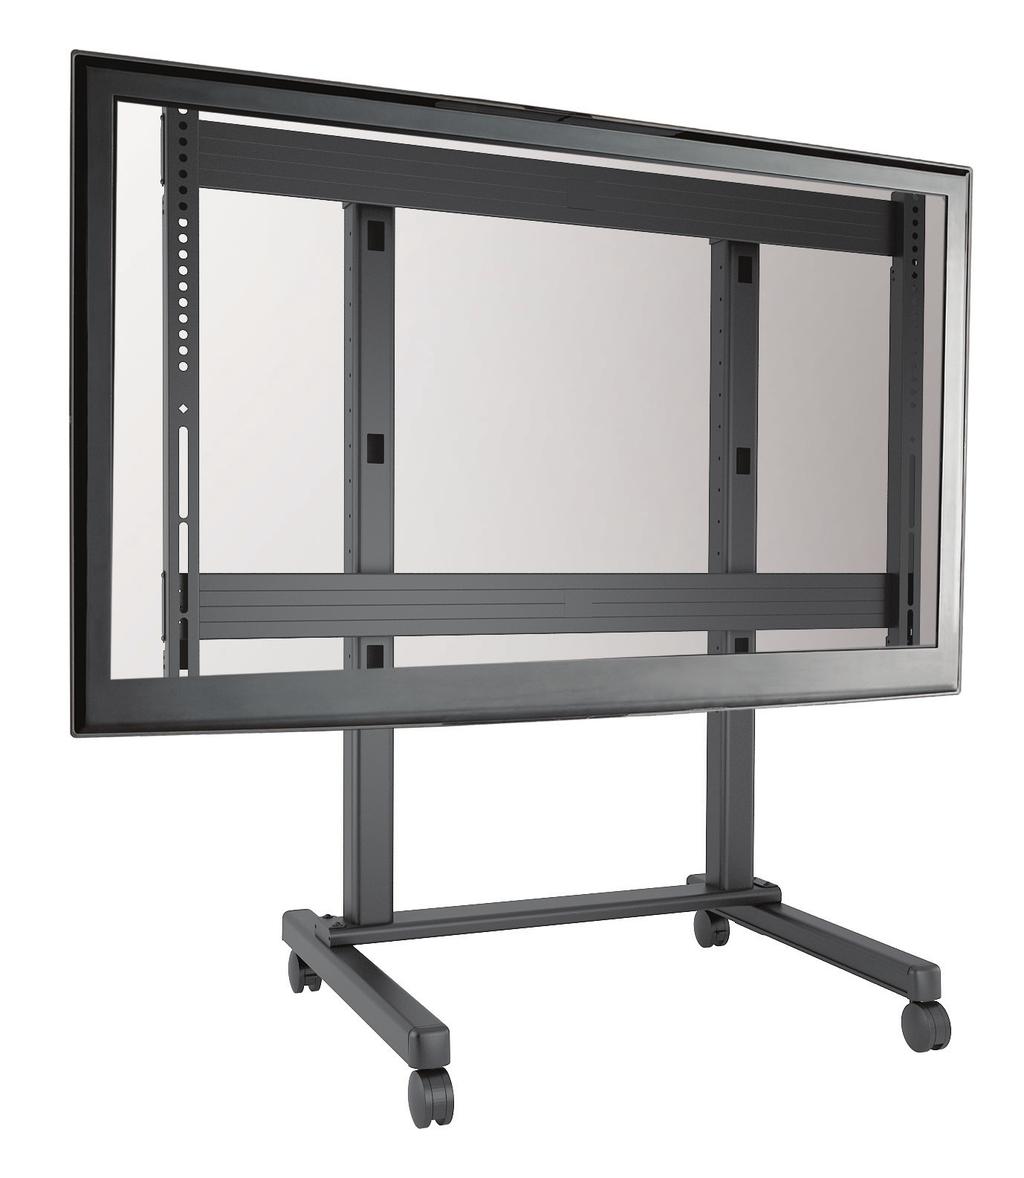 CART & STAND SOLUTIONS EXTRA LARGE VIDEO WALLS Chief also offers the FUSION Extra Large Single Screen Cart, which provides a mobile solution for screens between 90" and 105" and up to 500 lbs (226.